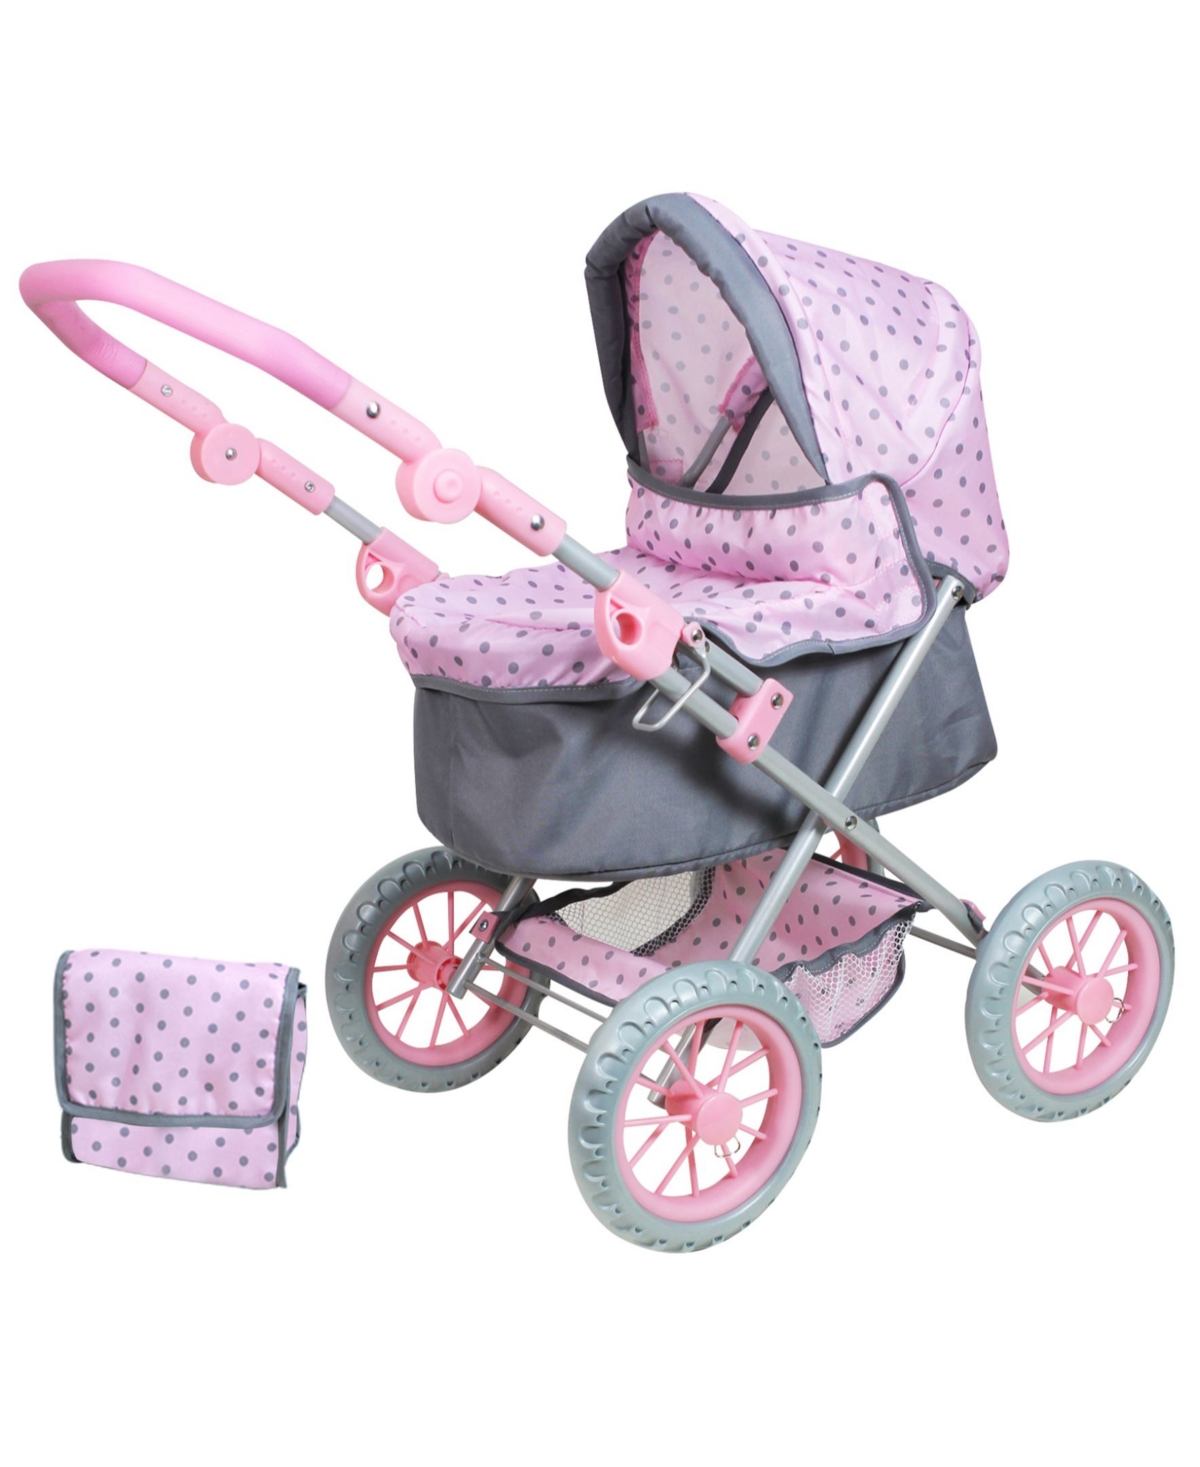 Lissi Dolls Lissi Baby Doll Pram With Accessories In Multi